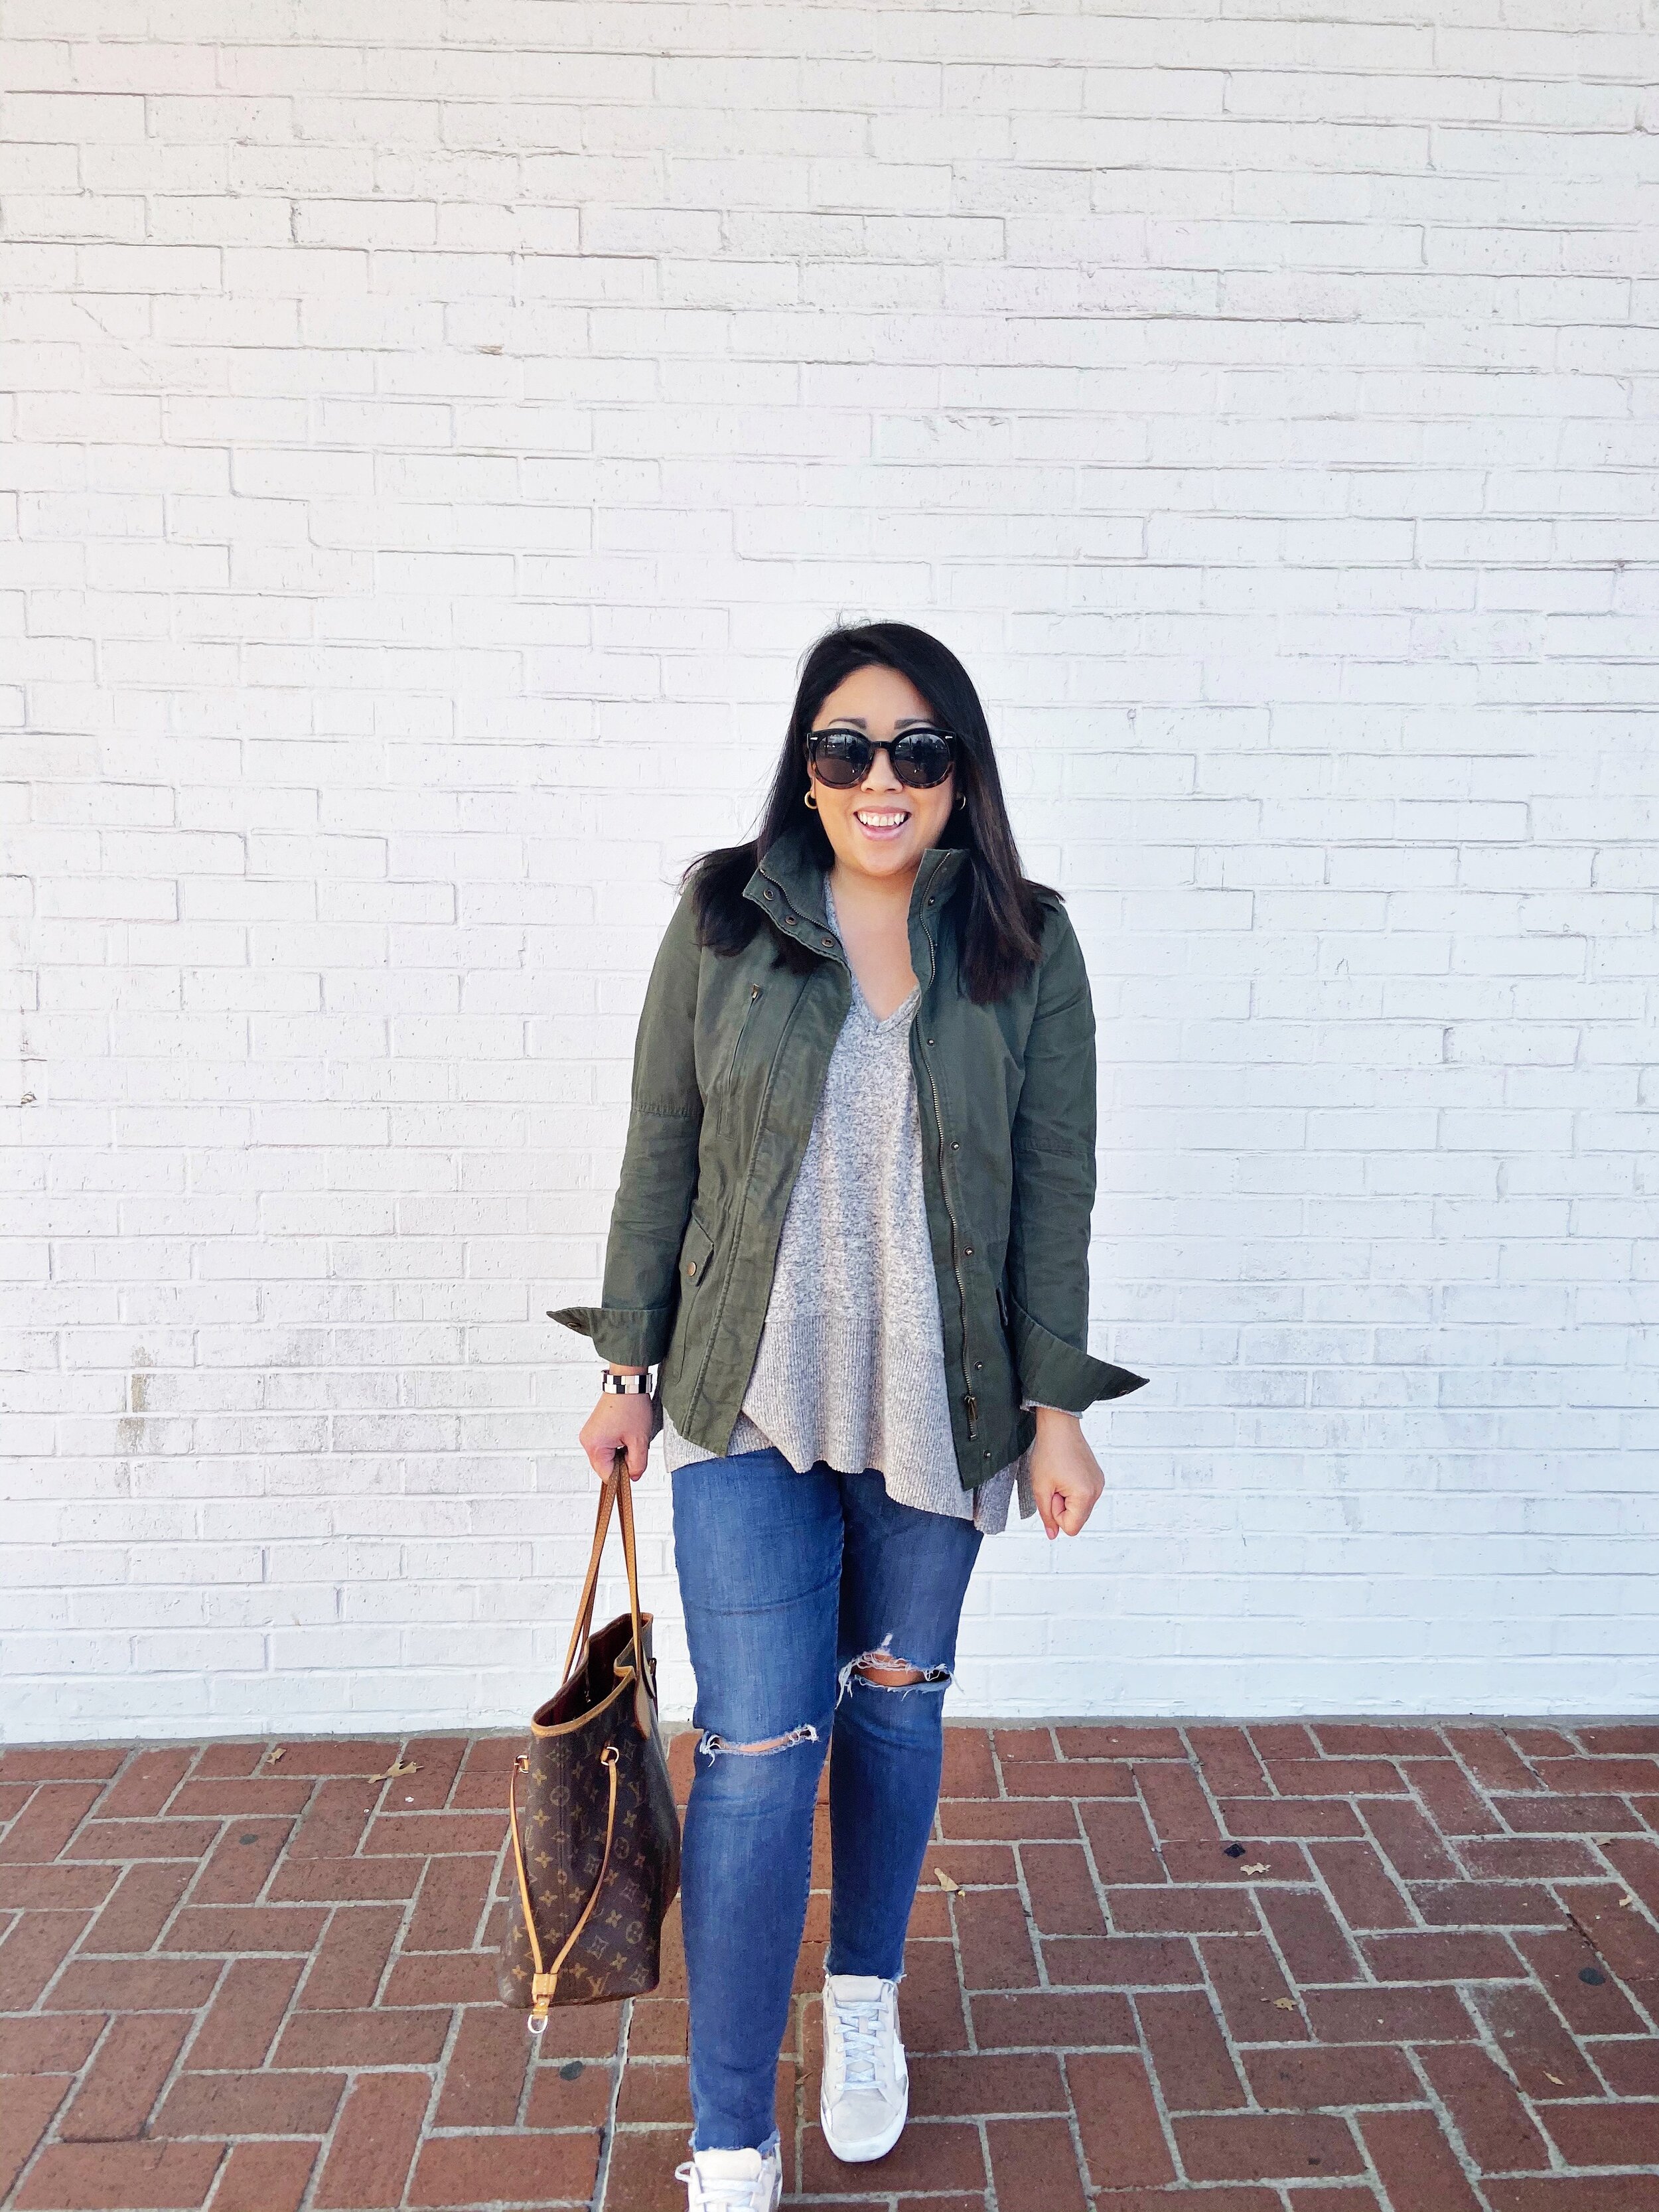 20 for 2020: My Goals for the Upcoming Year — Hey Thuy